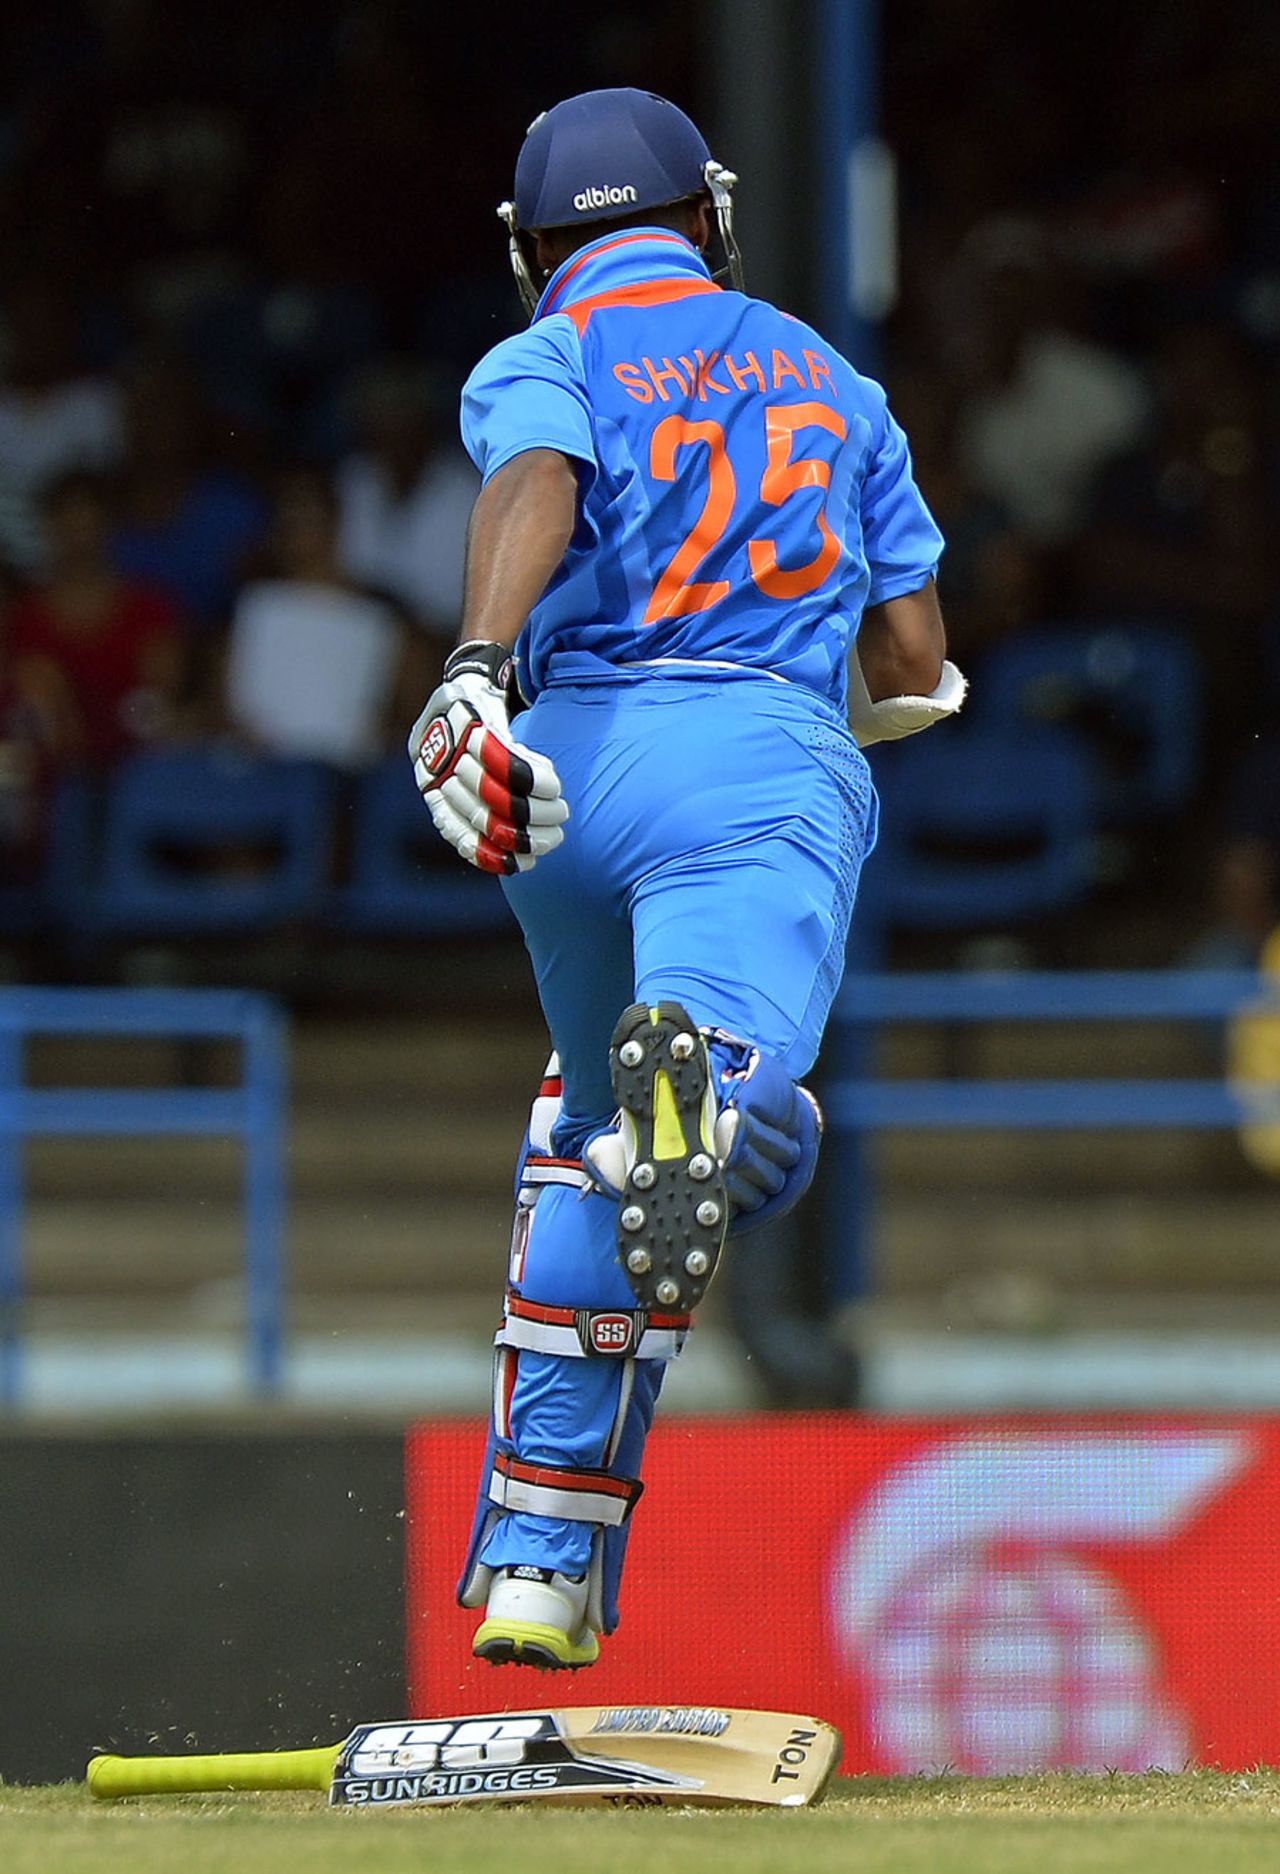 Shikhar Dhawan loses control of his bat while completing a single, West Indies v India, West Indies tri-series, Port of Spain, July 5, 2013